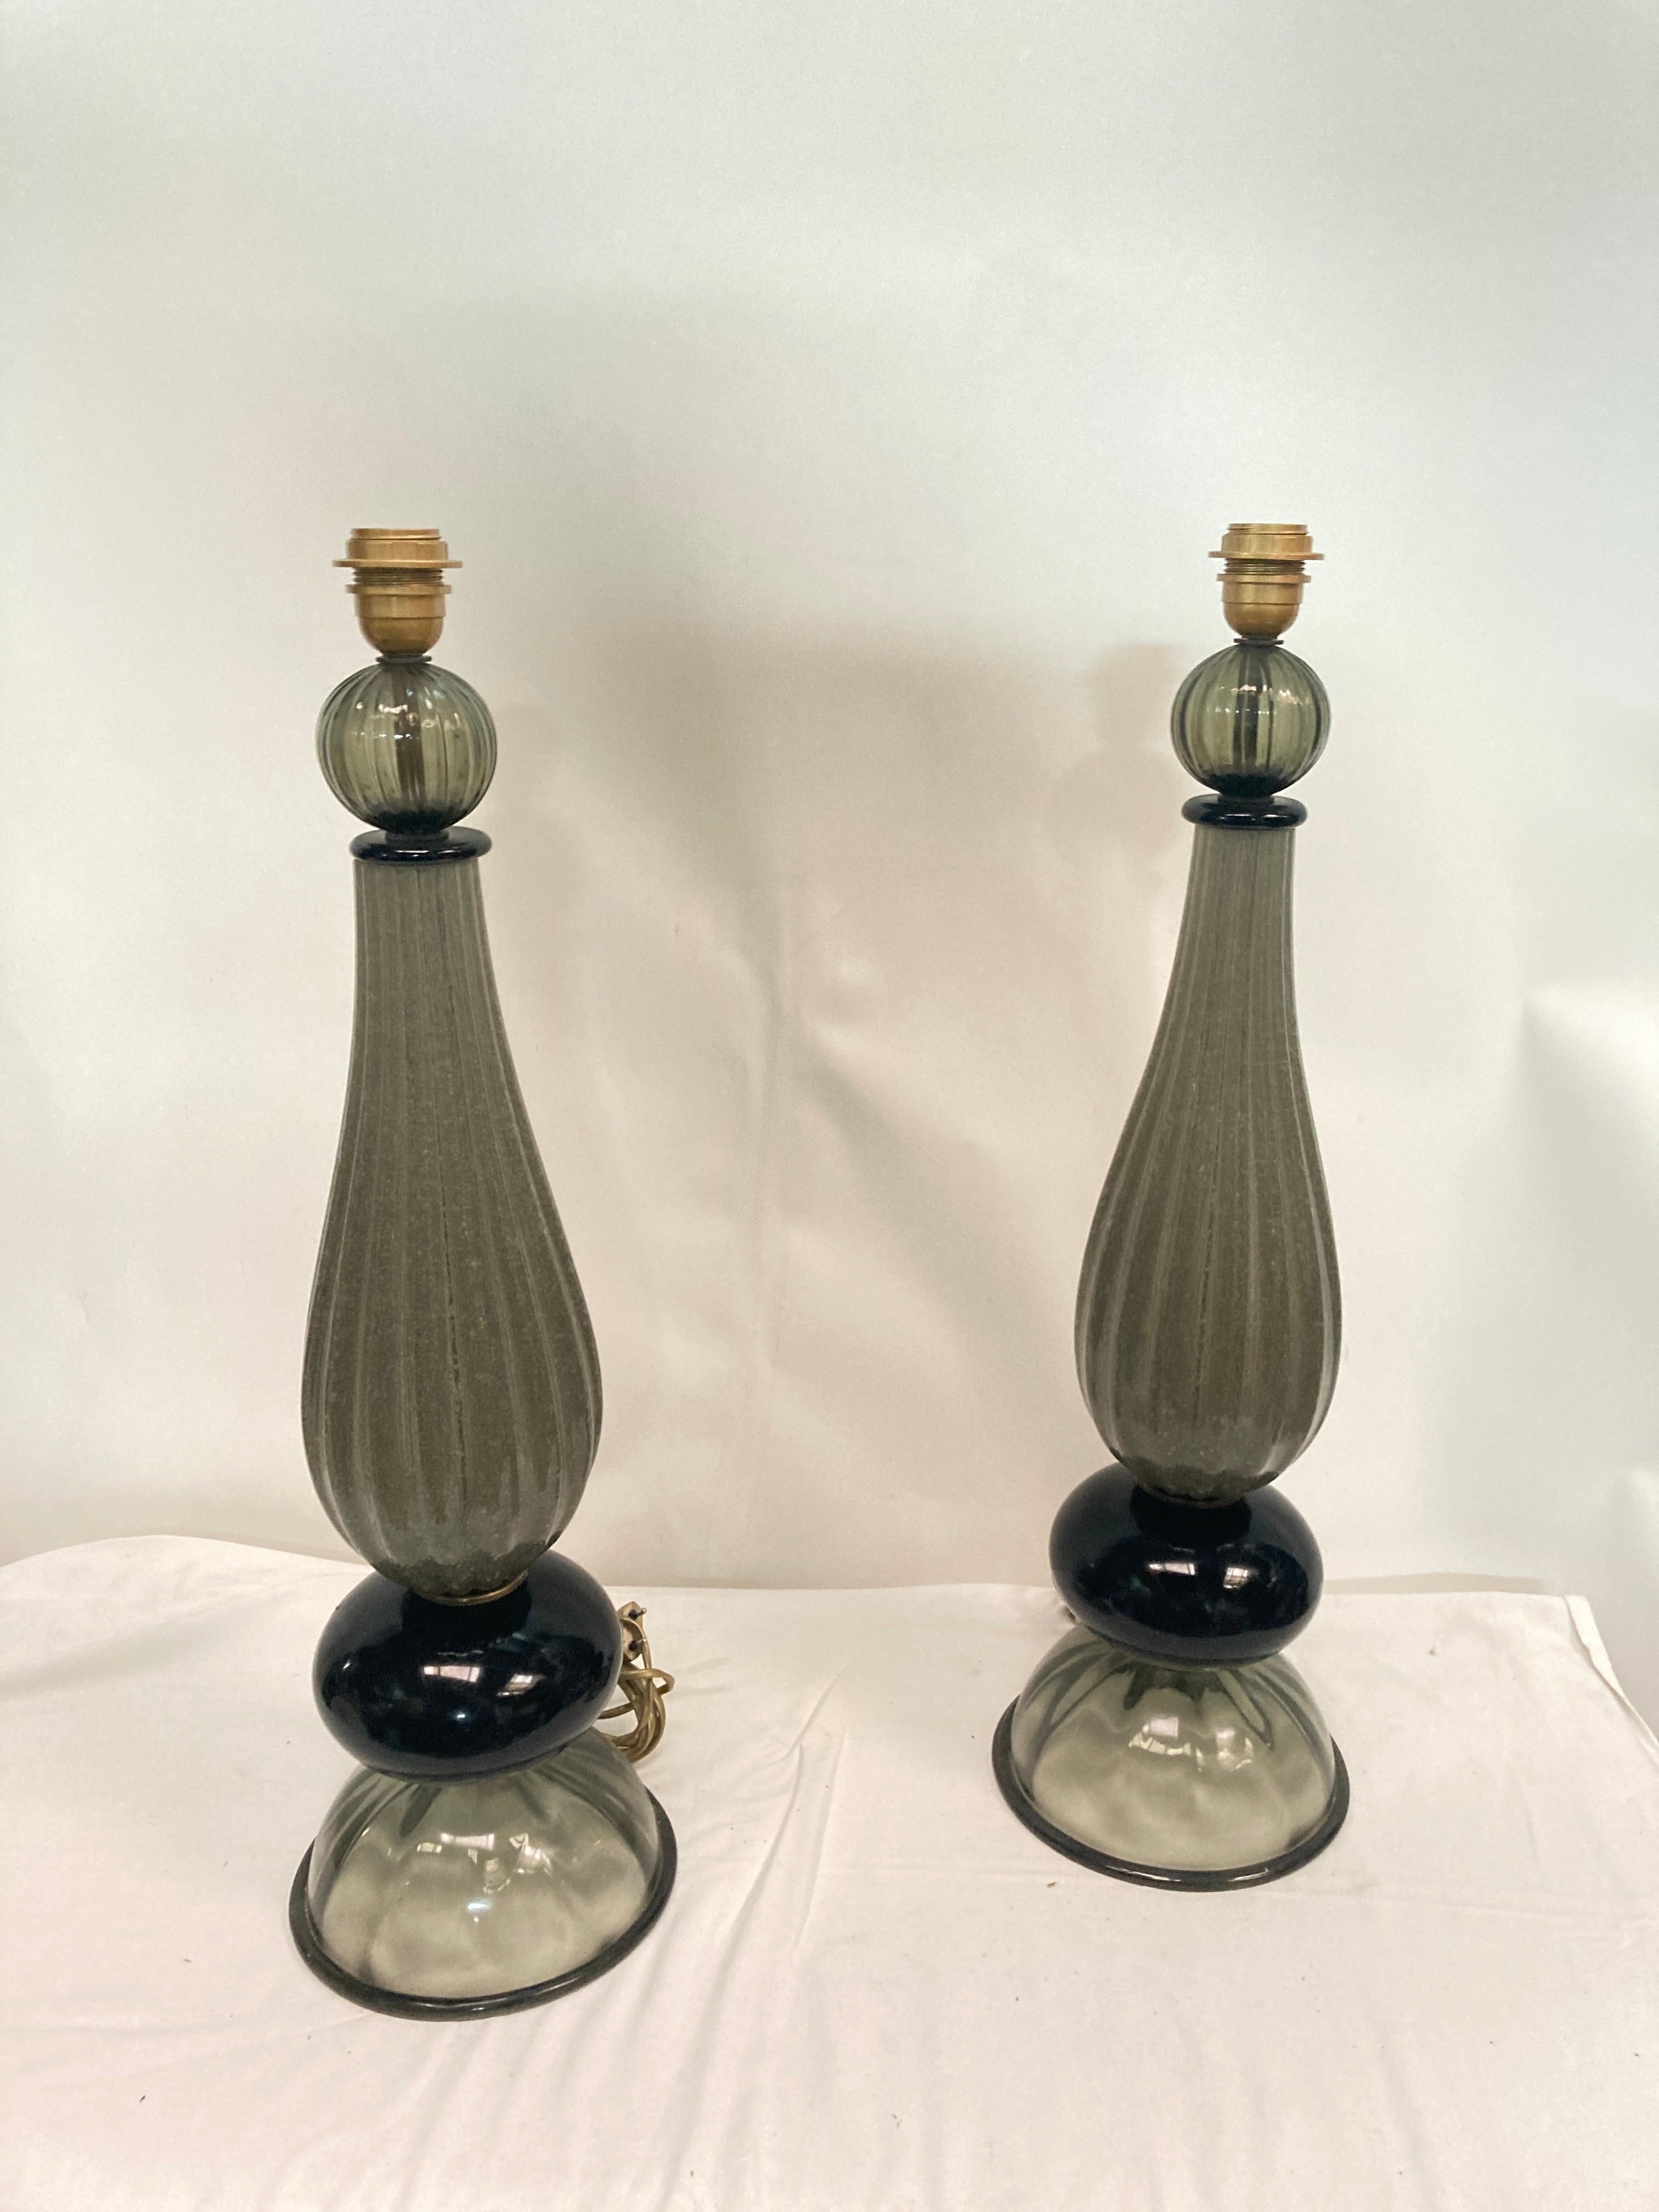 Pair of tall Murano glass lamps
Grey and black
Re-wired 
No shade included
